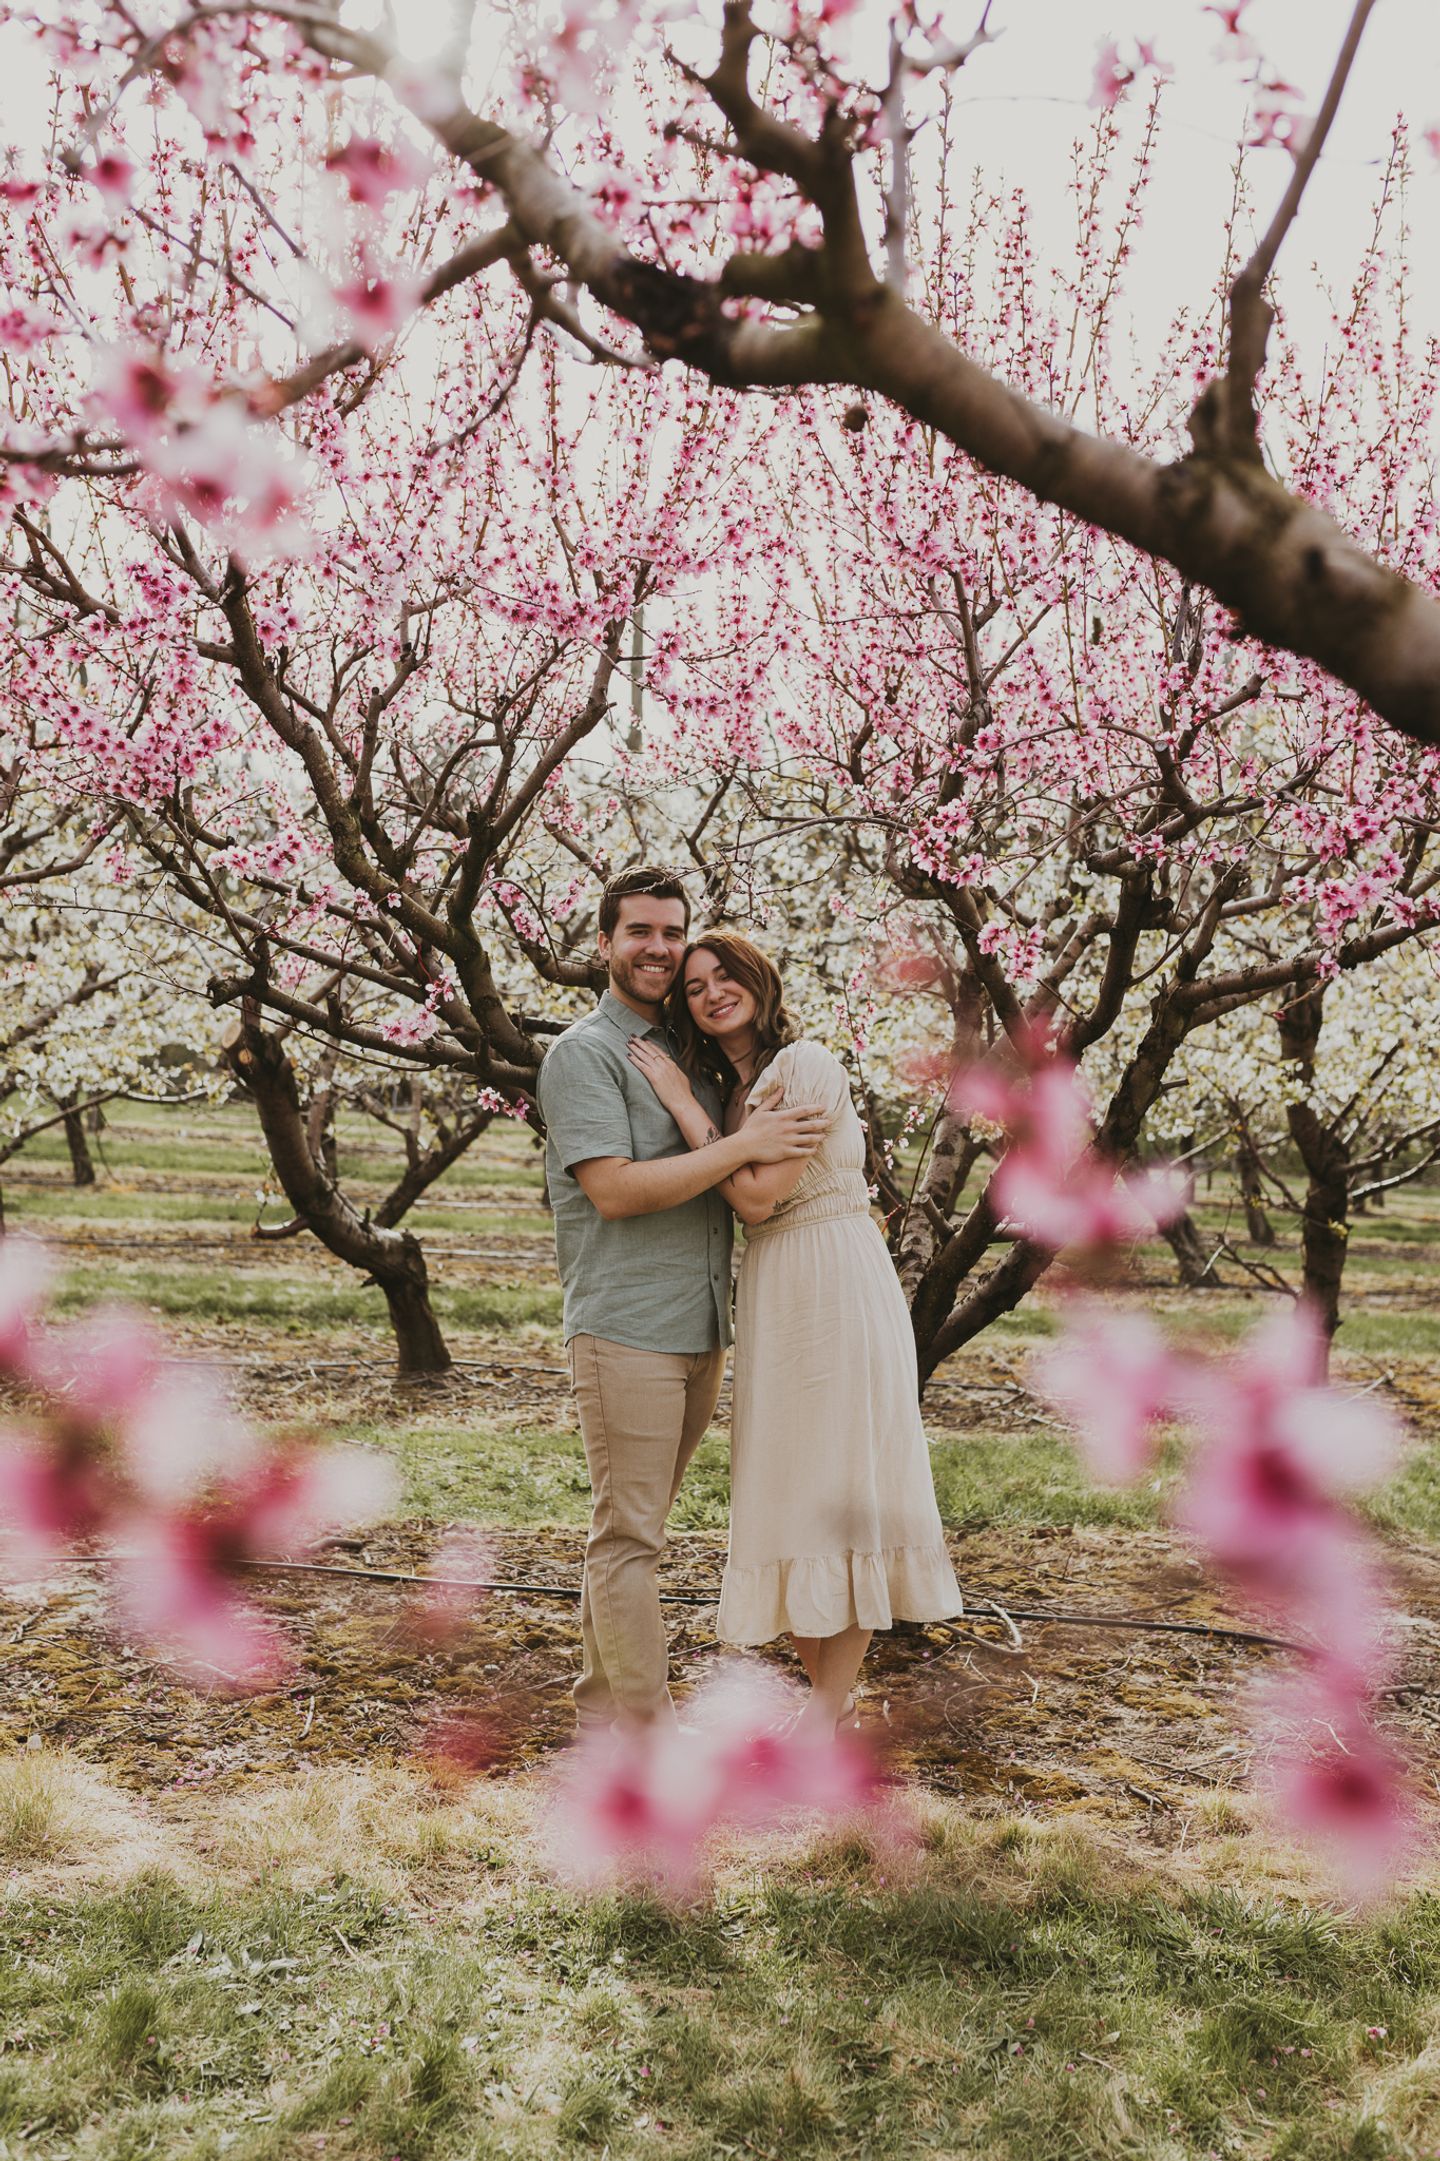 Couples Photoshoot at Robinette's in the Peach Blossoms